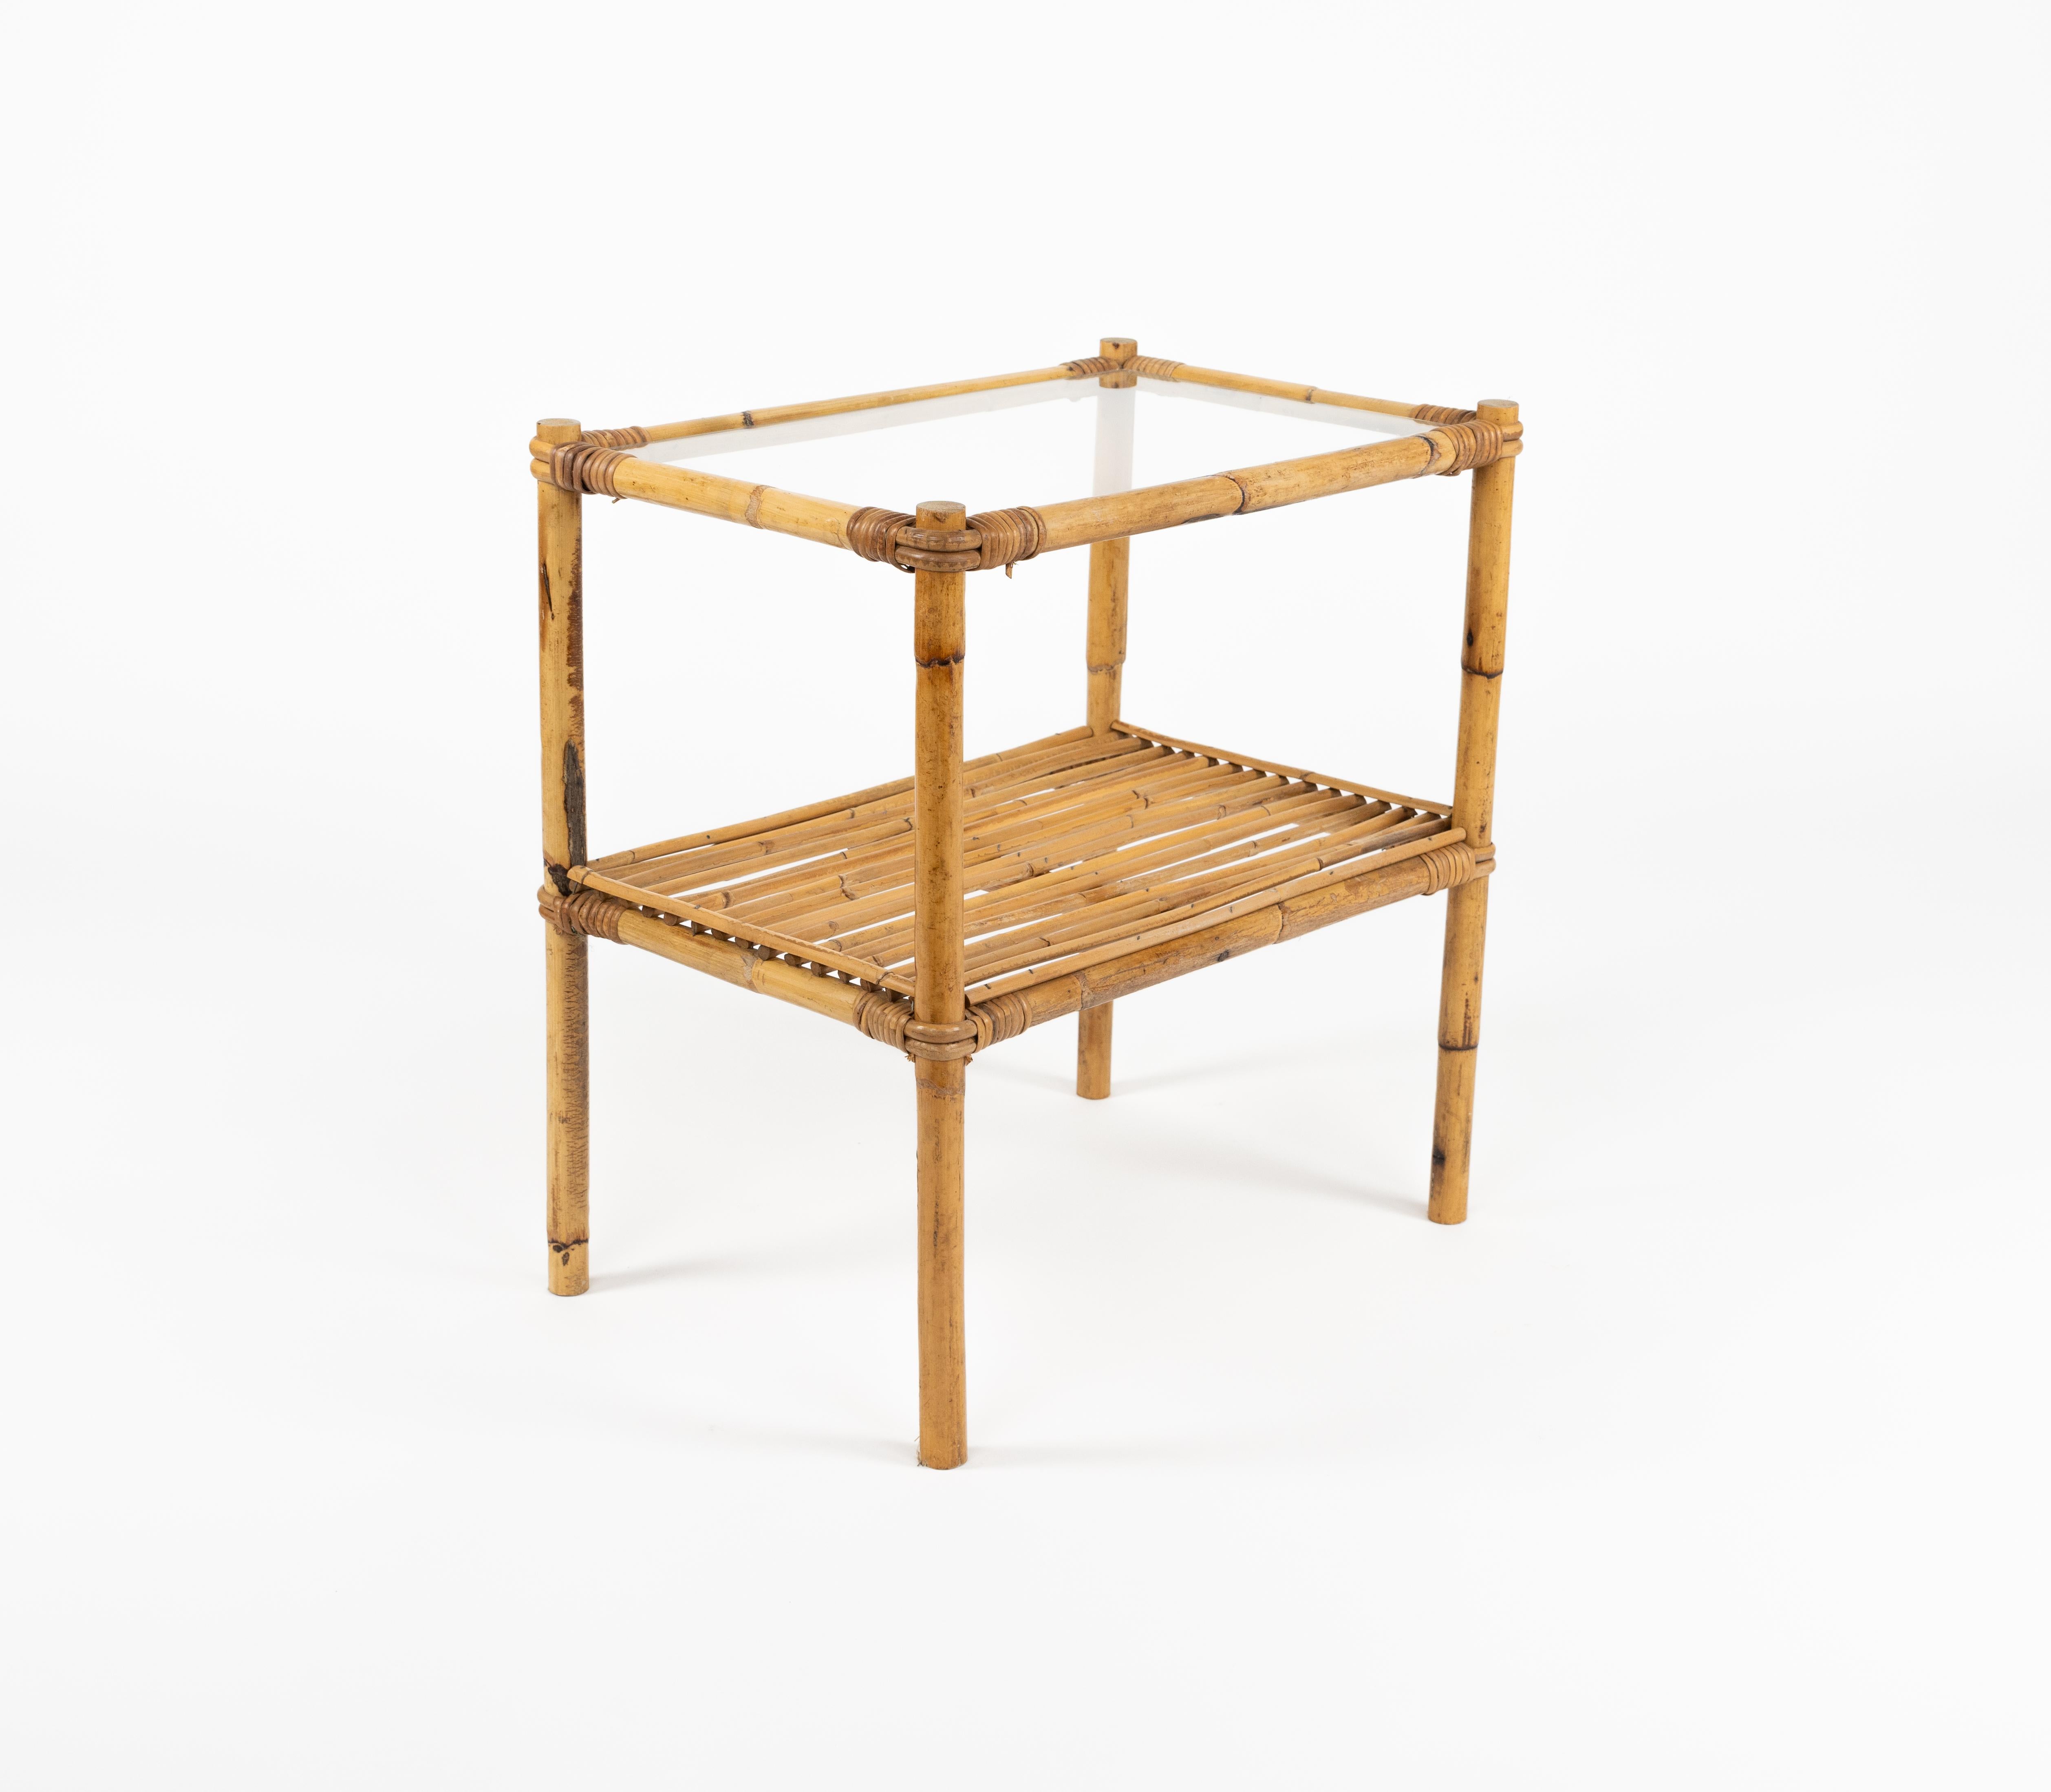 Midcentury Side Table in Bamboo, Rattan and Glass, Italy 1970s For Sale 1